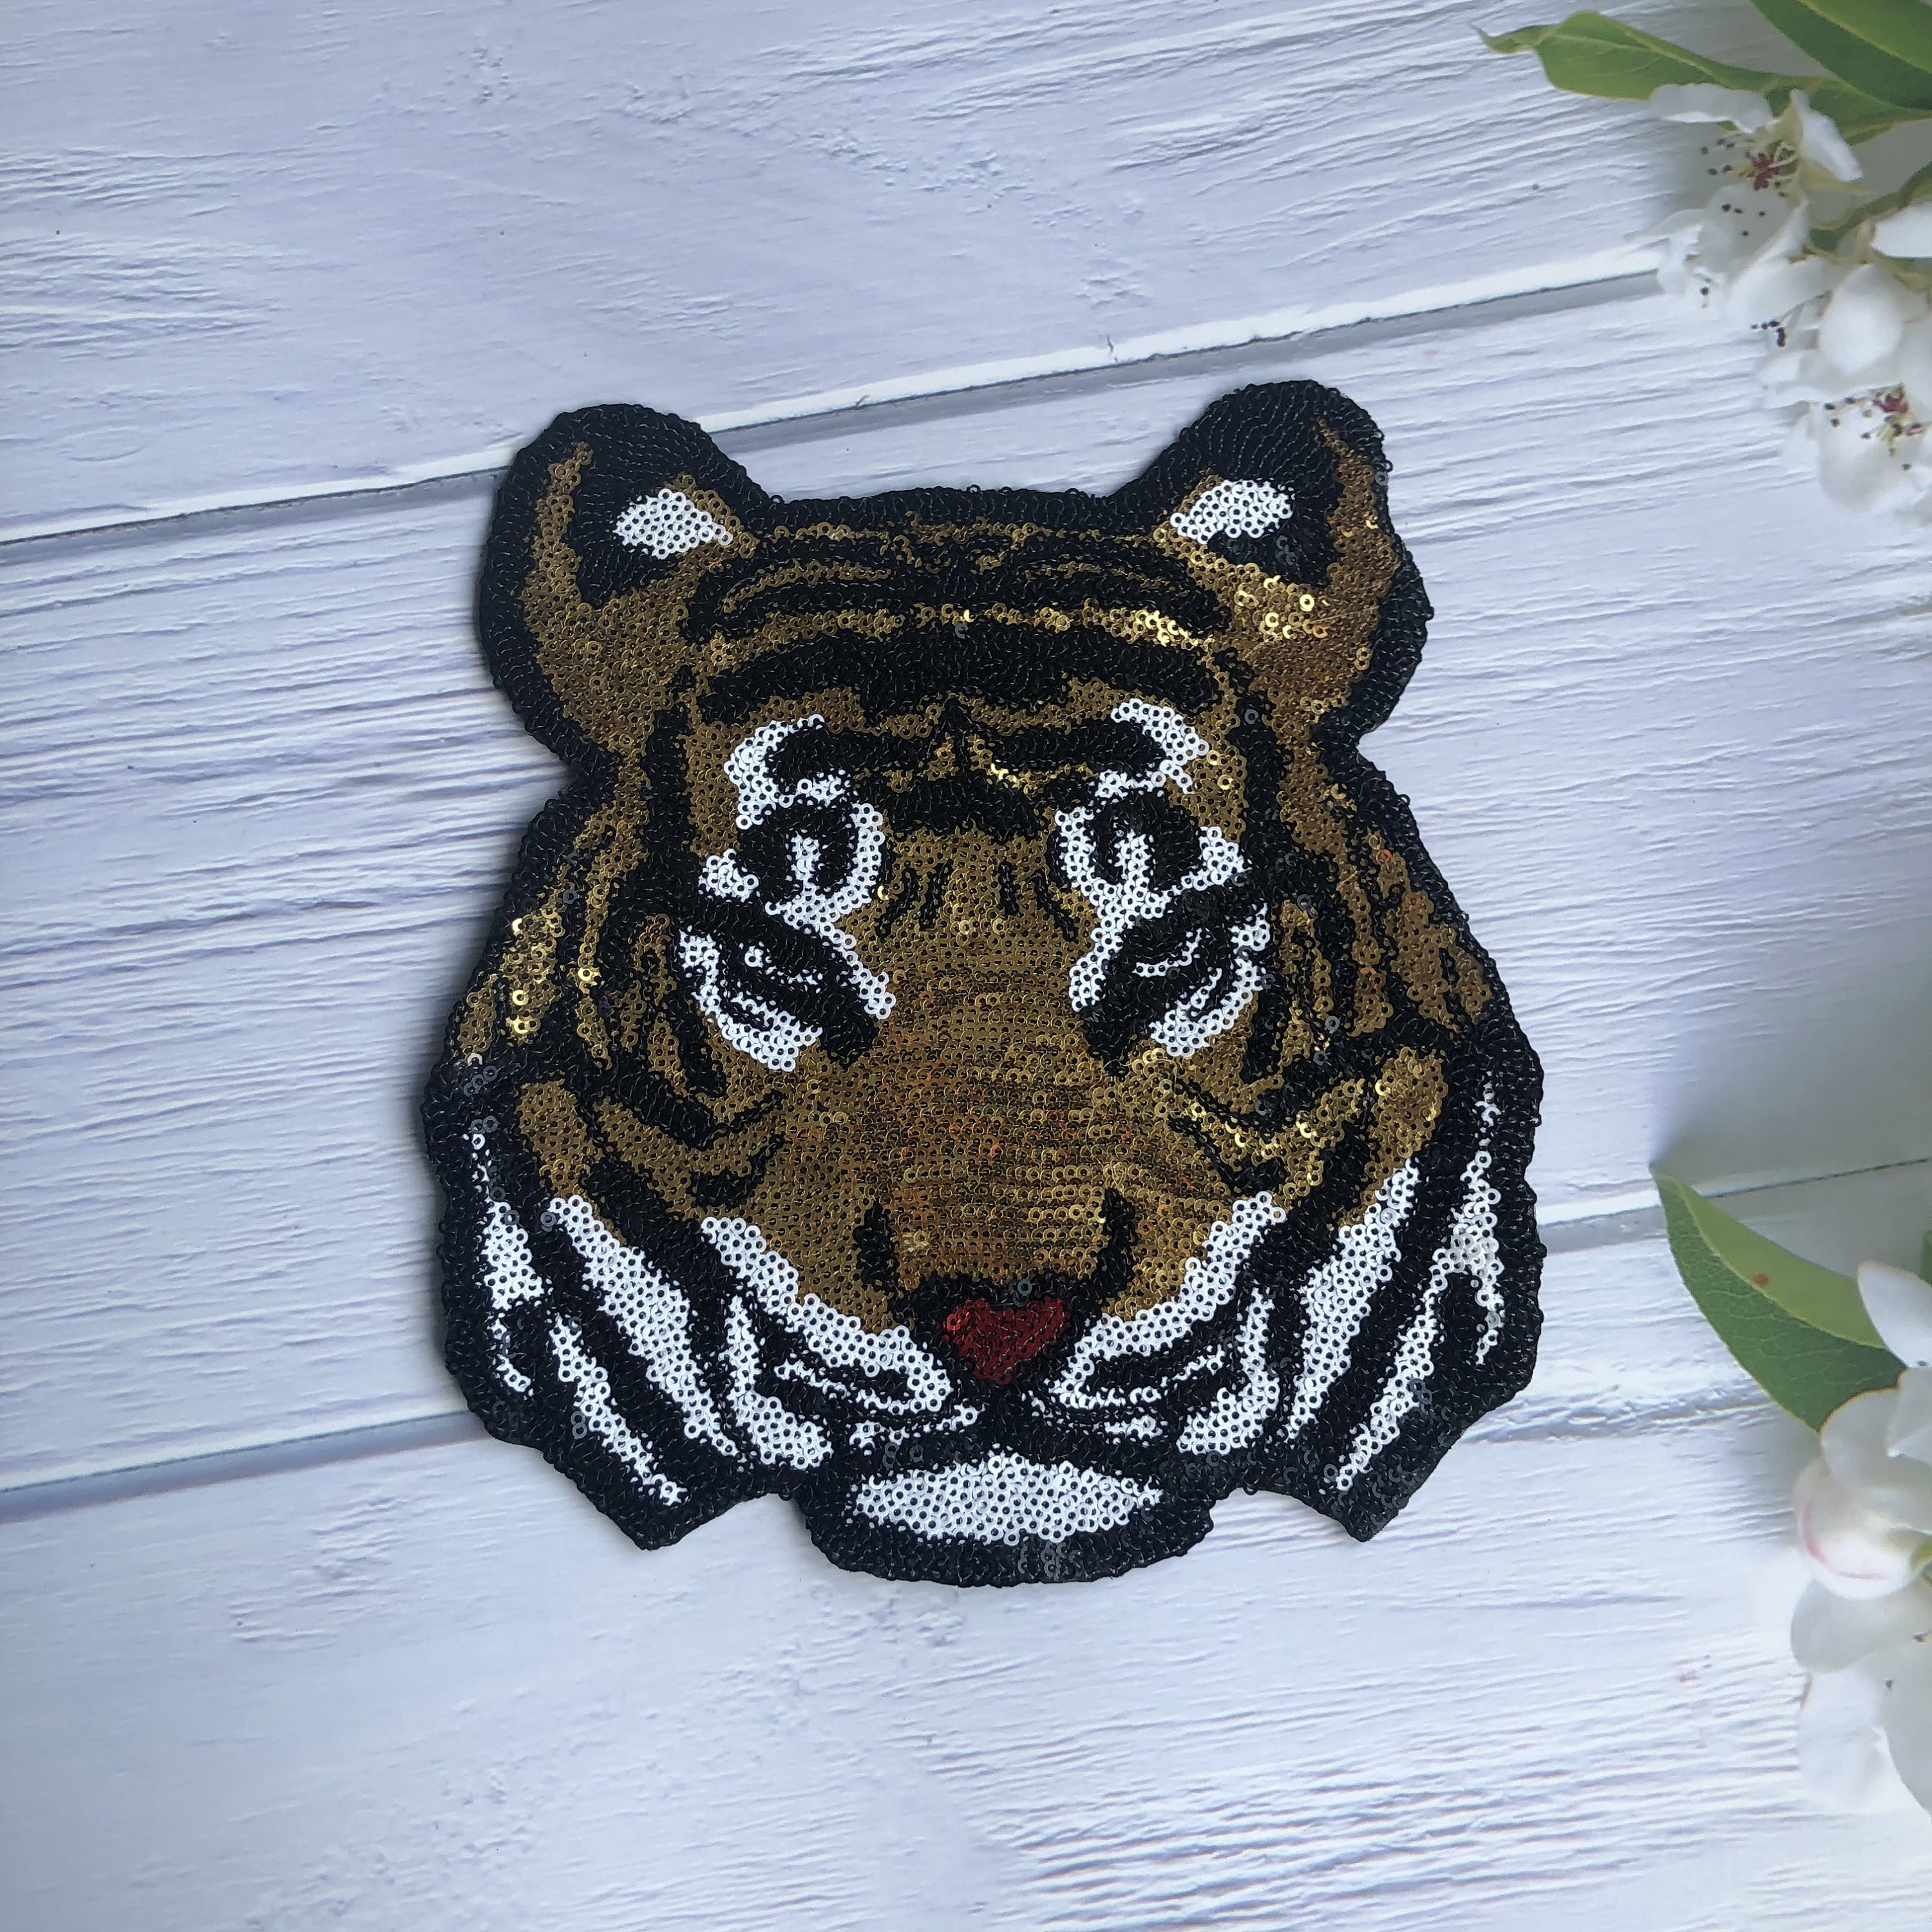 Large Iron on Patches for Jackets Large Blue Tiger Patch 